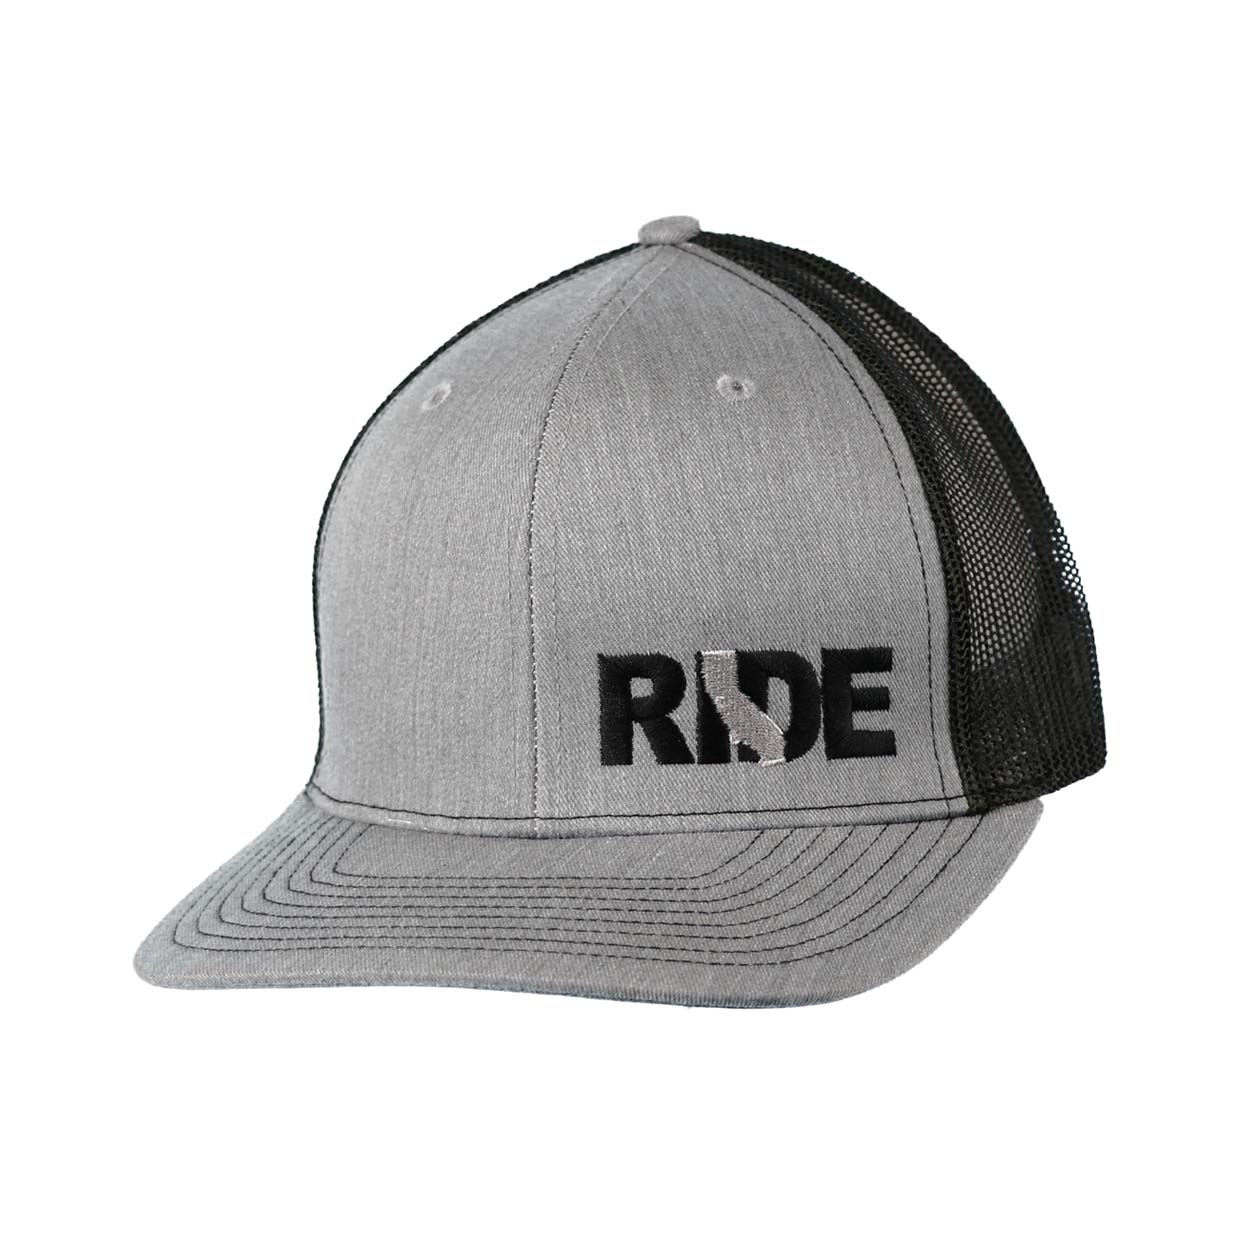 Ride California Night Out Pro Embroidered Snapback Trucker Hat Heather Gray/Black